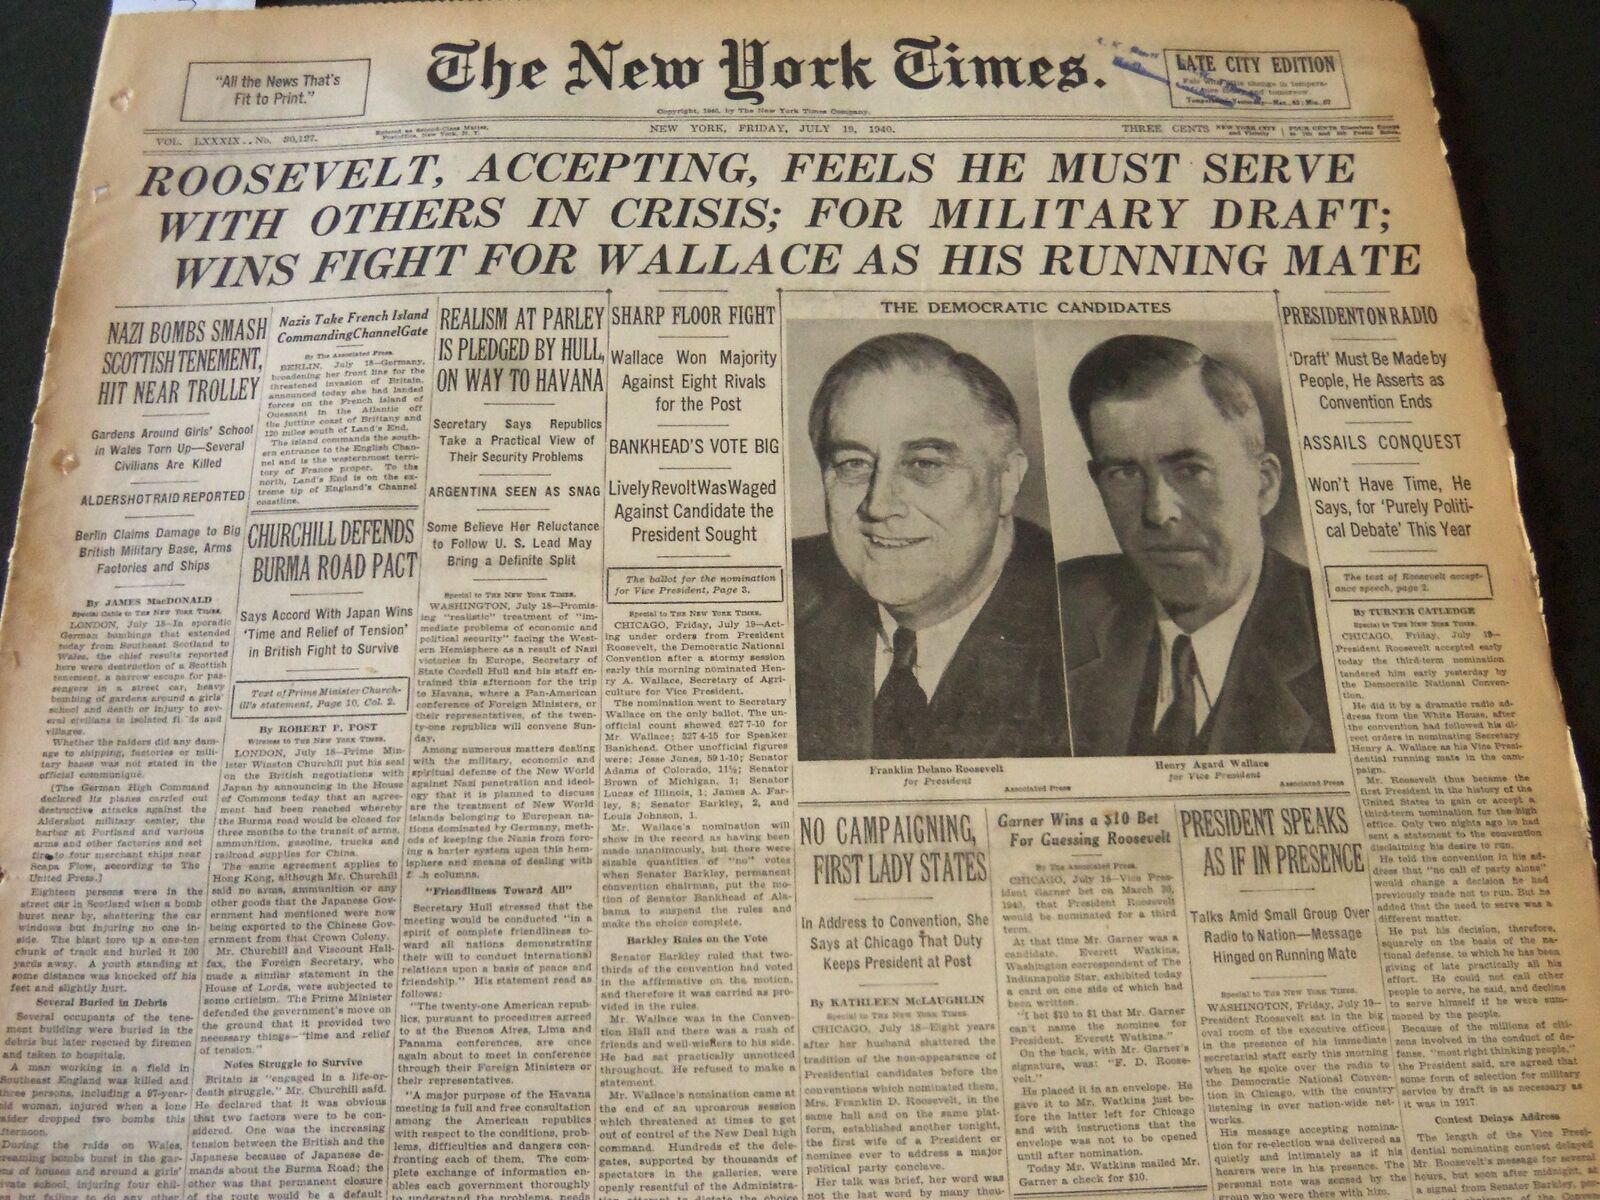 1940 JULY 19 NEW YORK TIMES - ROOSEVELT ACCEPTING FEELS HE MUST SERVE - NT 5913